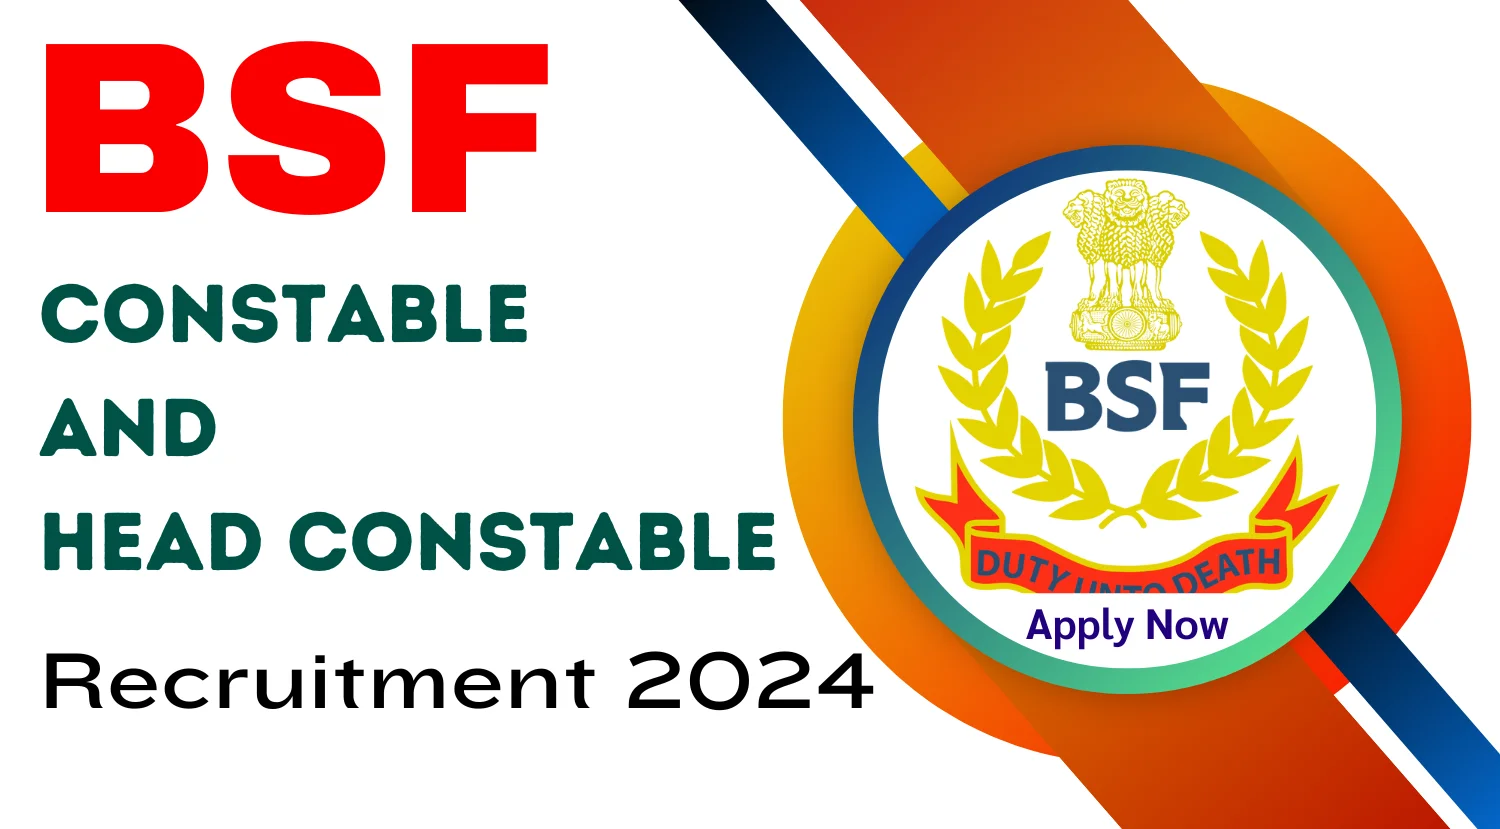 BSF Constable and Head Constable Recruitment 2024 Notification Out